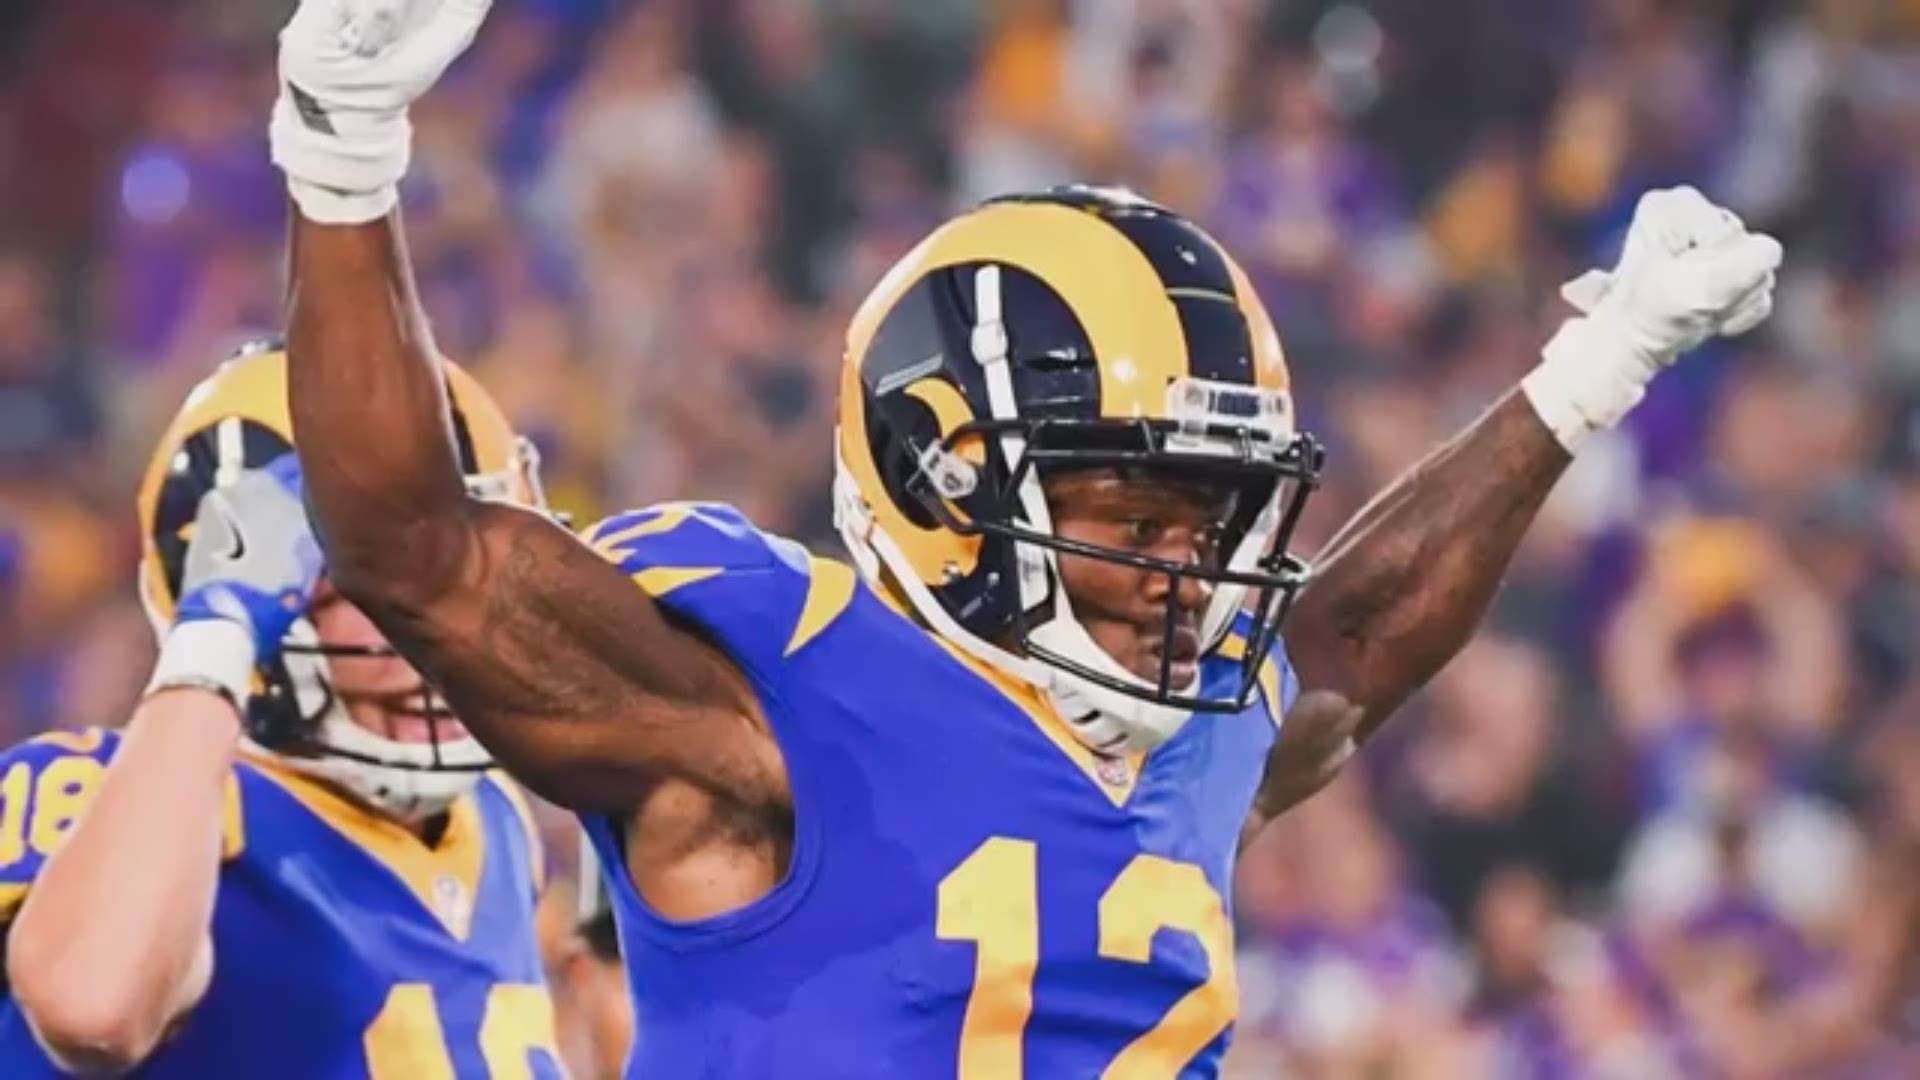 Not one, but two former Lincoln High School football stars will be playing on Super Bowl Sunday this weekend in Atlanta.  LA Rams players Brandin Cooks, Wide Receiver, and Justin Davis, Running Back, will be suiting up on Sunday, hoping to bring home some hardware.